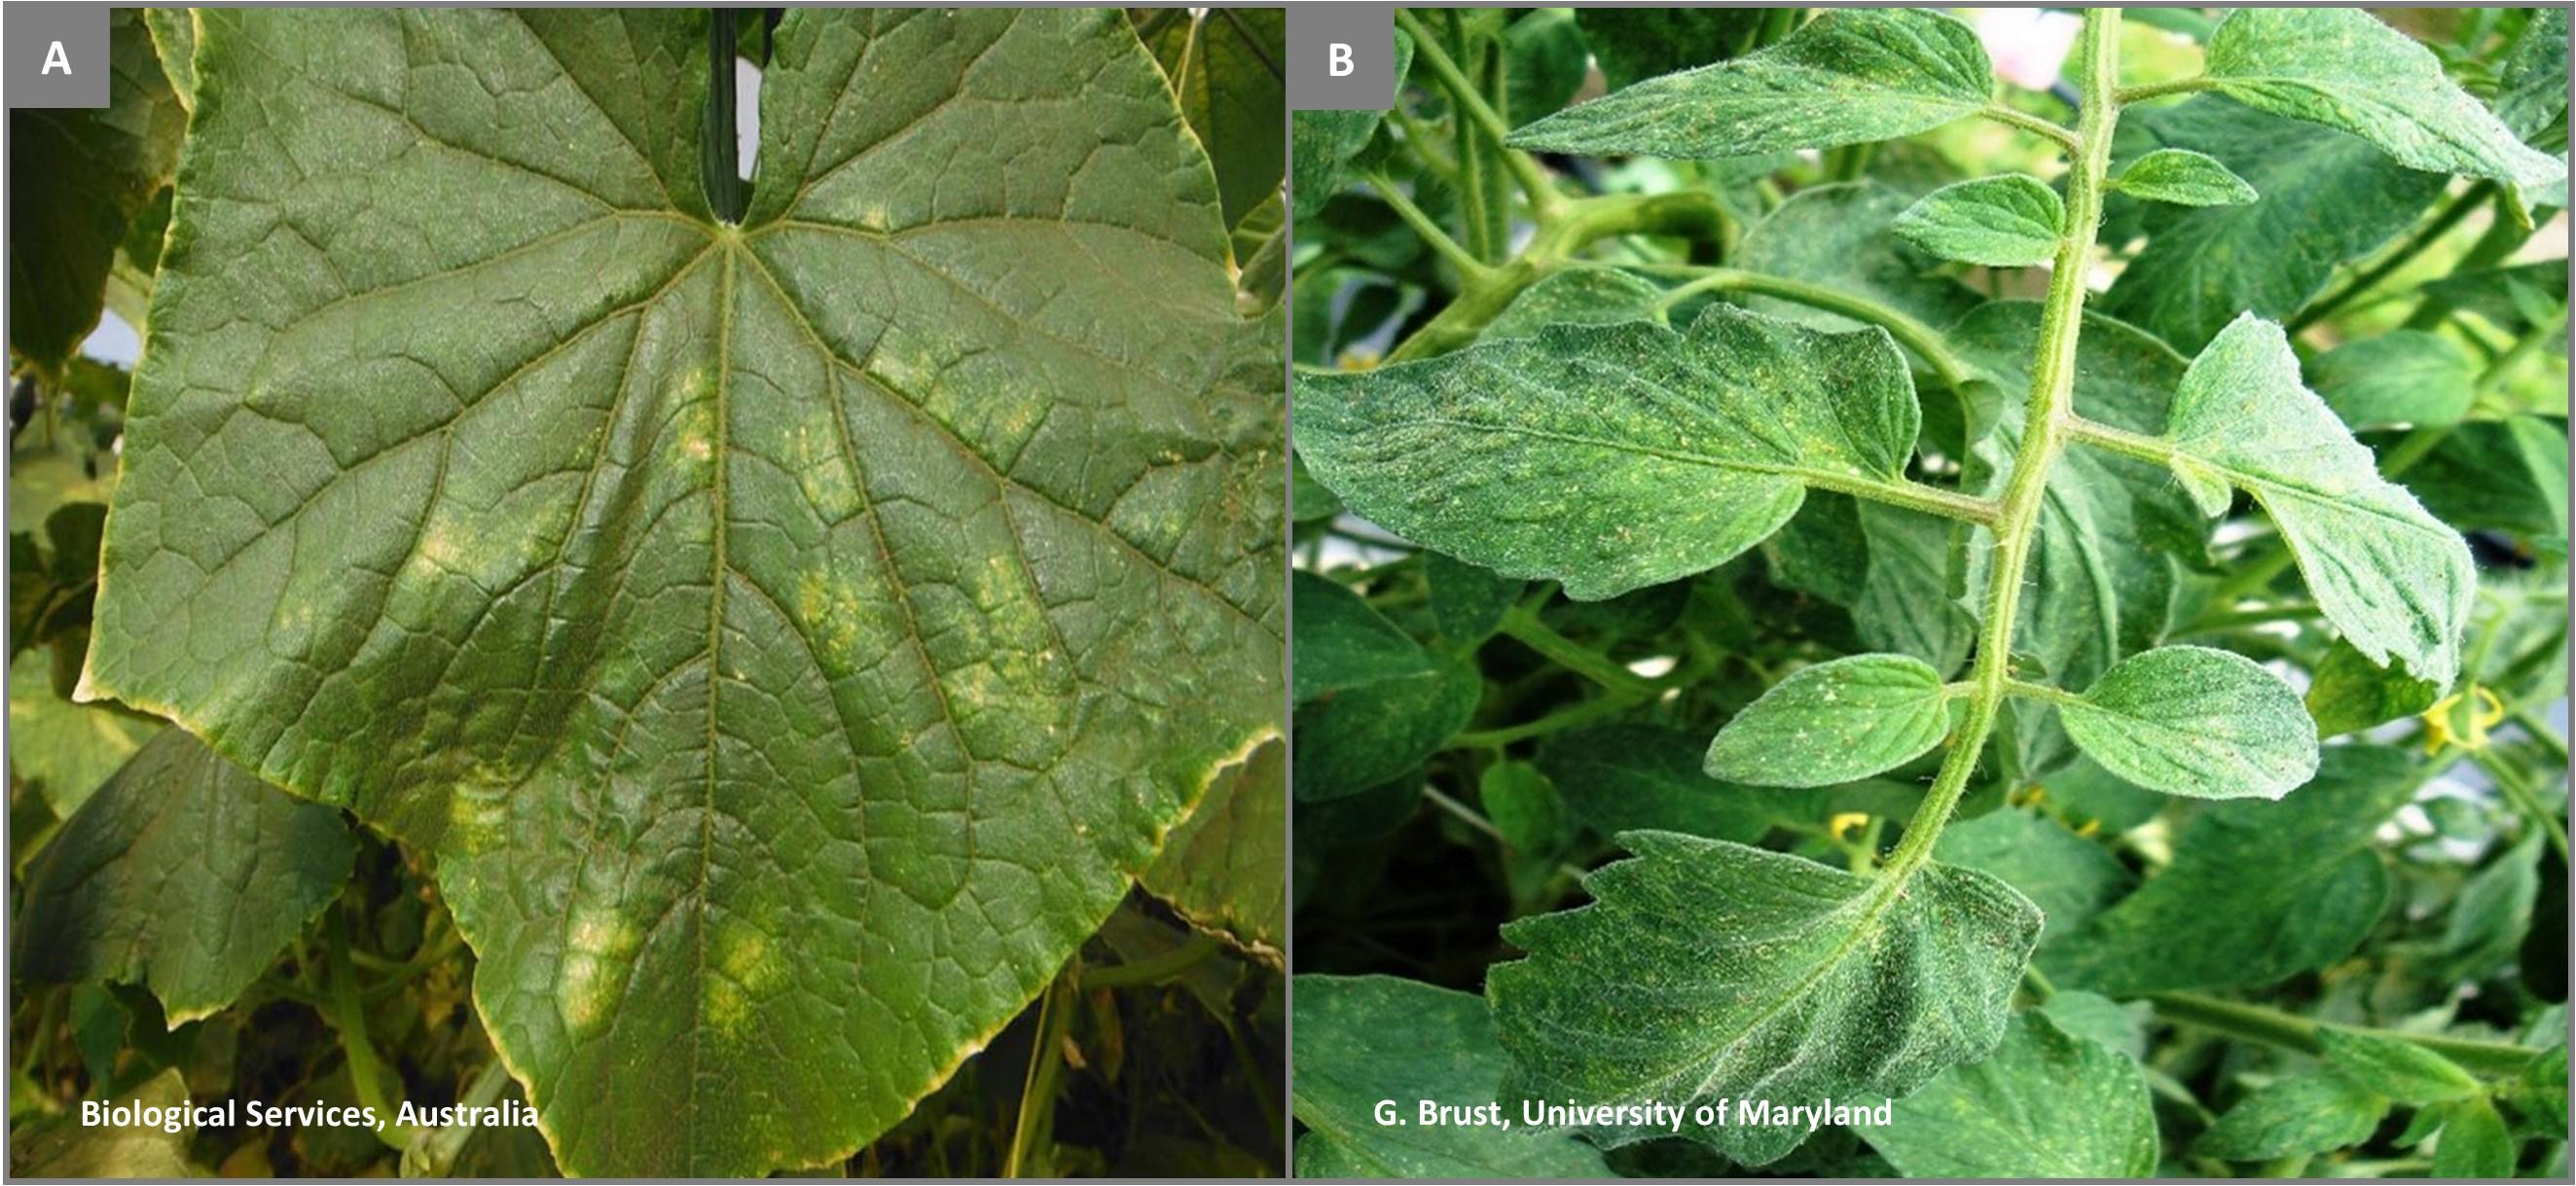 Two-spotted mite feeding damage on cucumber and tomato plants